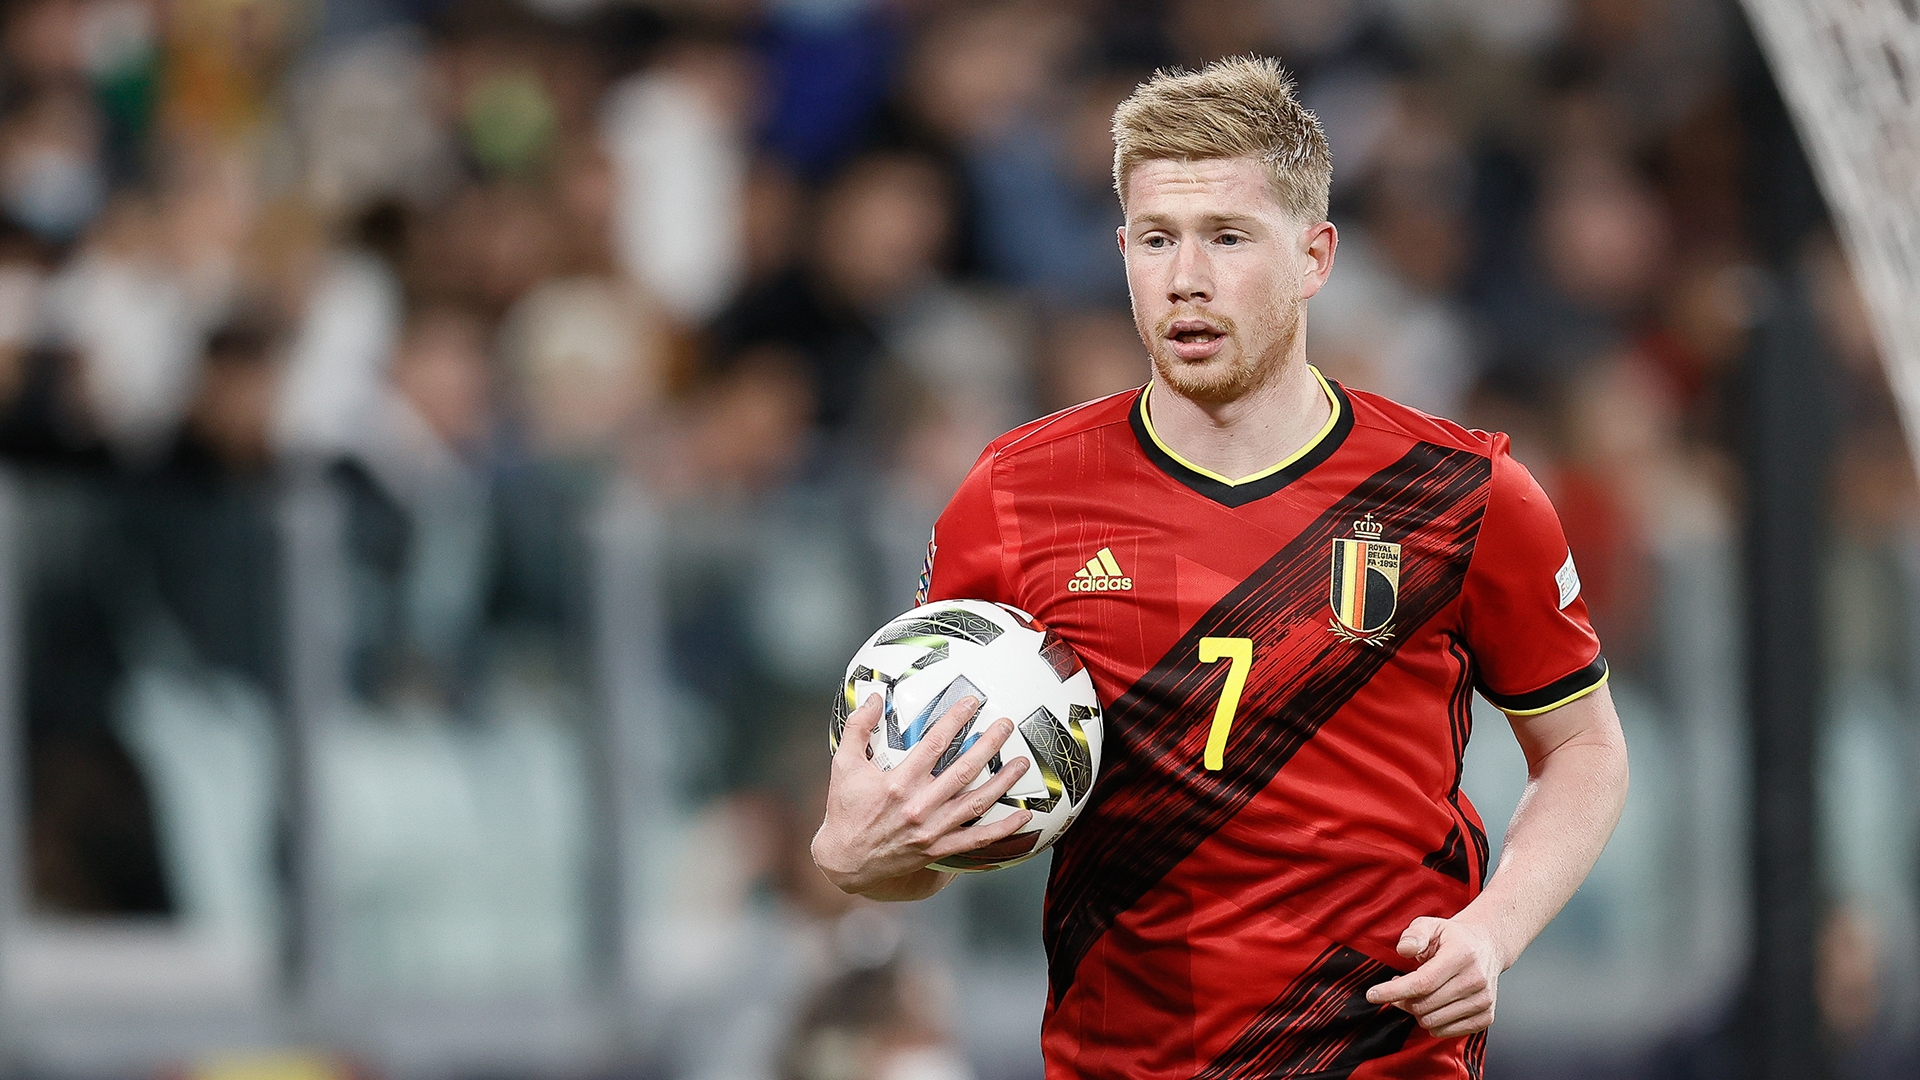 The Nations League is unimportant' - Belgium star De Bruyne 'not looking forward' to UEFA tournament | Goal.com